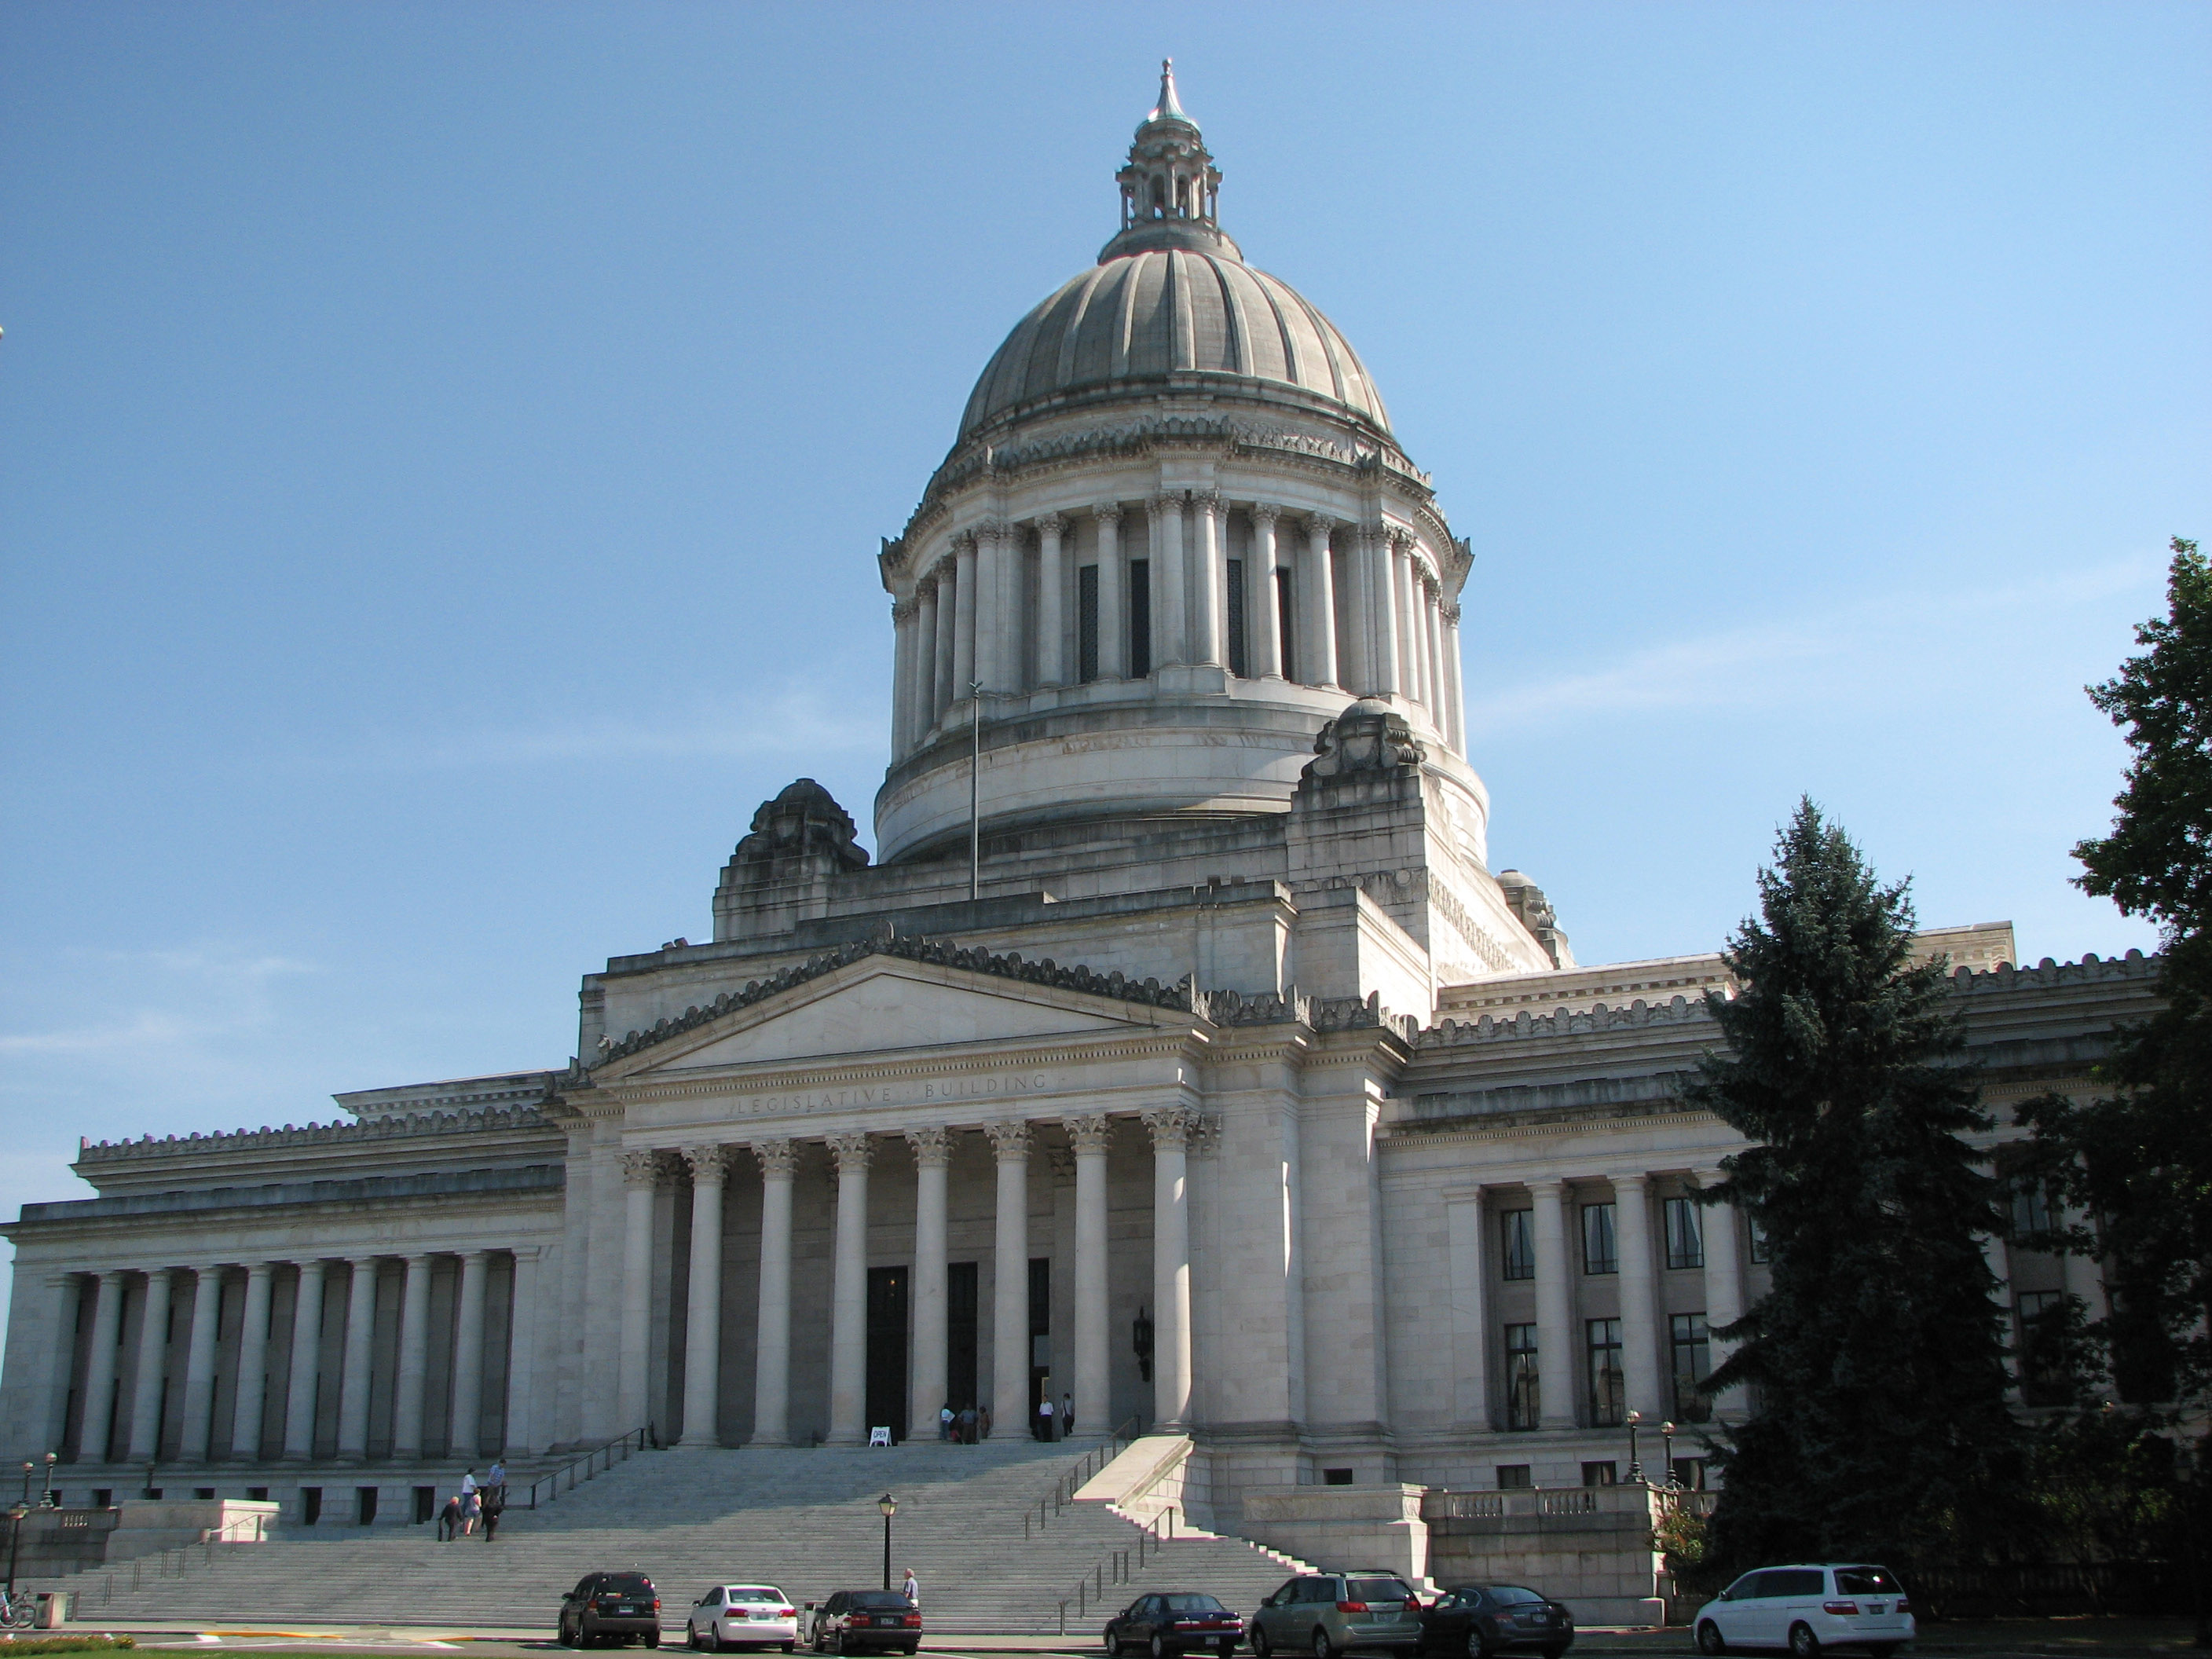 The Legislative Building of the Washington State Capitol, Olympia. The building is in afternoon sun. An "open" sign invites visitors inside to see the dome interior, tiffany chandelier, marble panels, and artwork. (Creative Commons photo by Gerald Hawkins)